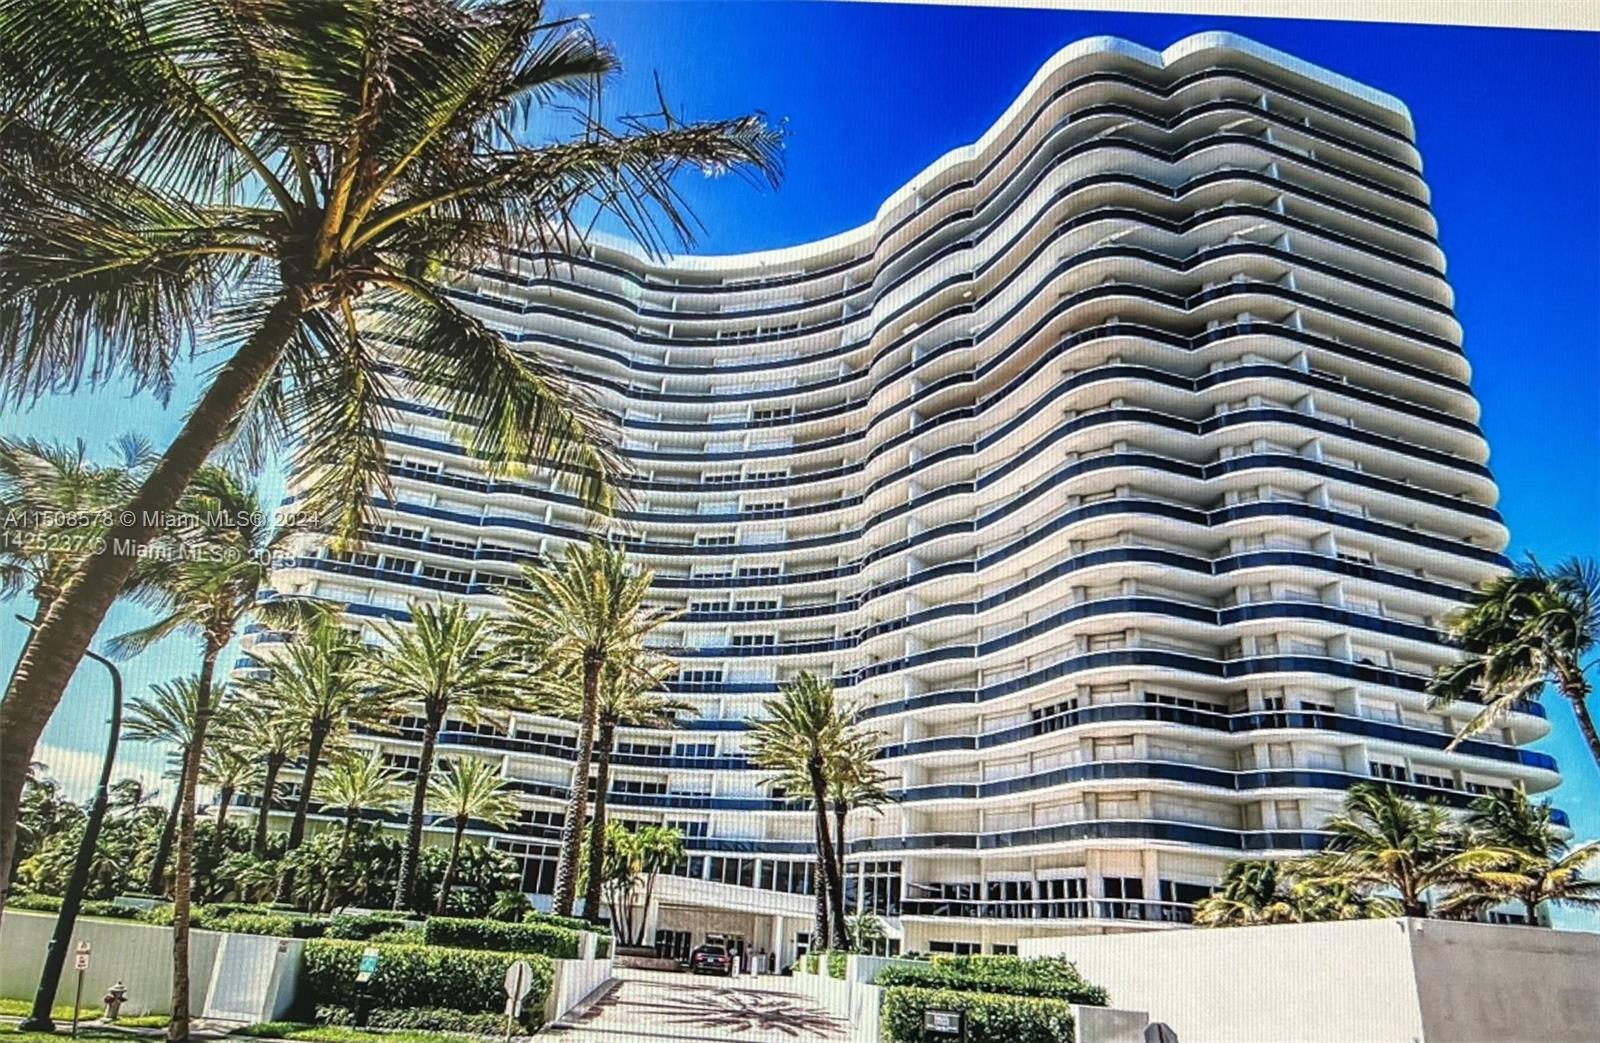 Don't Miss This Direct Oceanfront, Spacious 2 Bedroom Apartment in the Best Location of Bal Harbour!!! The Majestic Tower is a Full Service and Full Amenities Building With Private Elevator to the Unit. Across From Bal Harbour Shops, Restaurants and Shops!